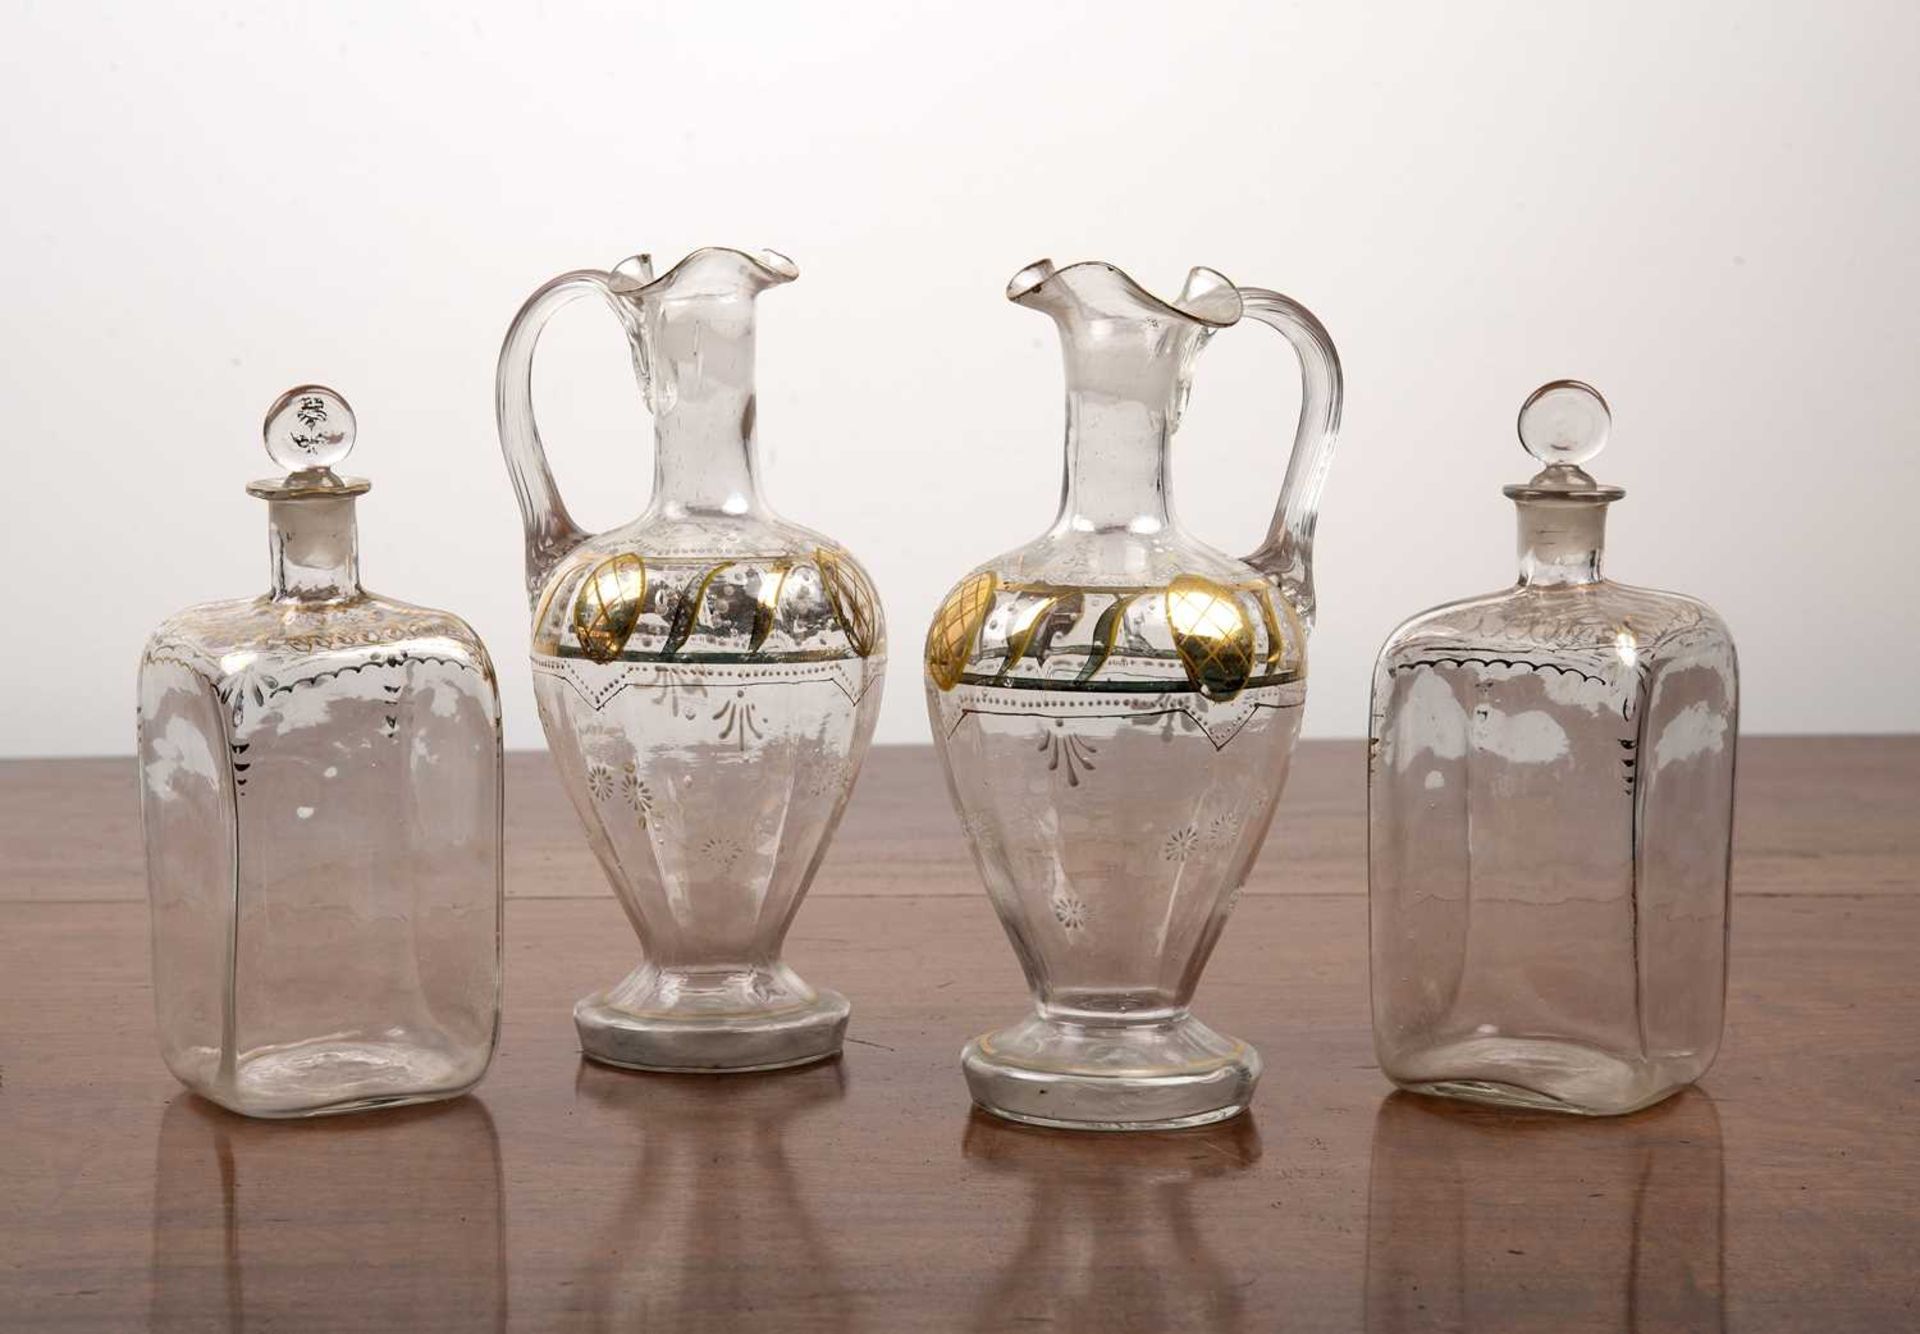 Pair of square glass spirit decanters and a pair of glass claret jugs 19th Century, the square glass